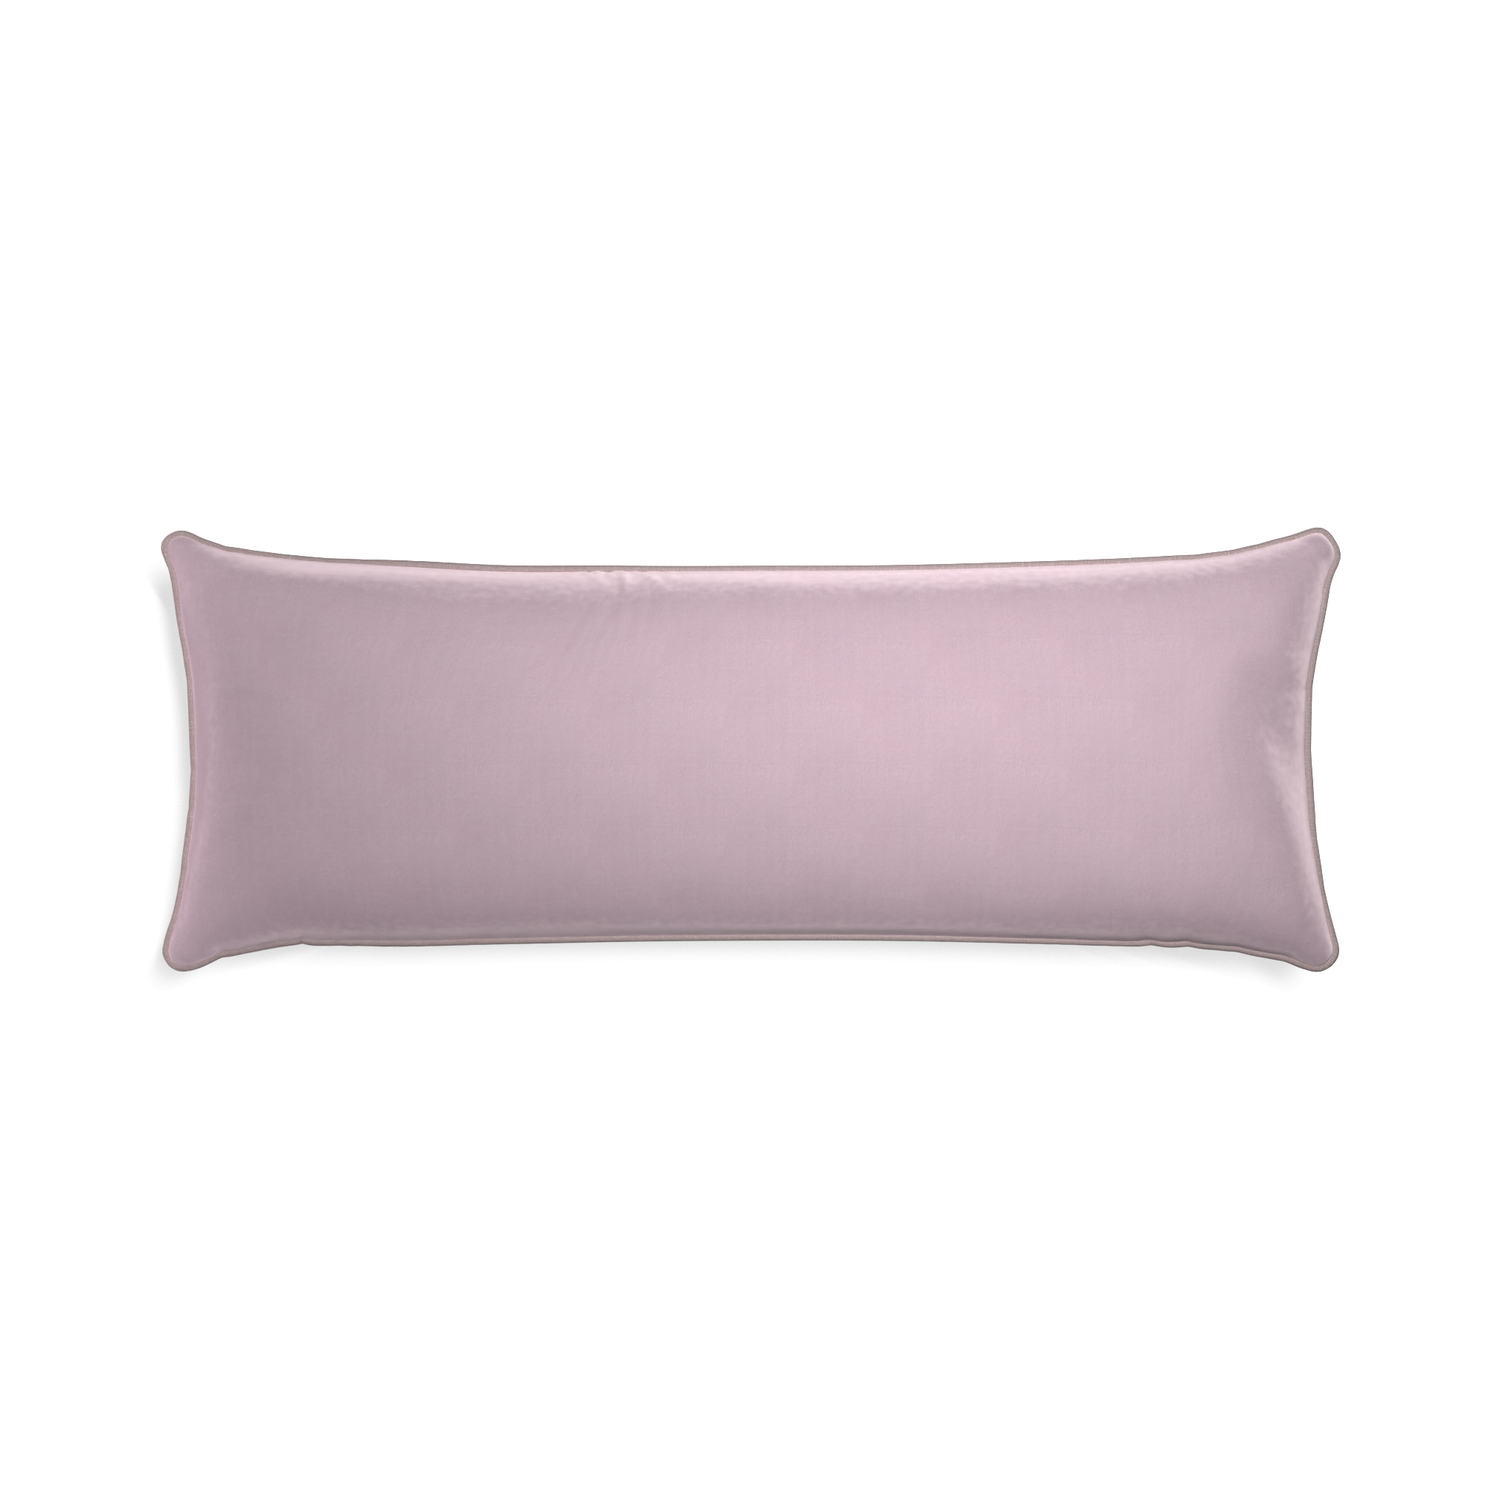 Xl-lumbar lilac velvet custom lilacpillow with orchid piping on white background